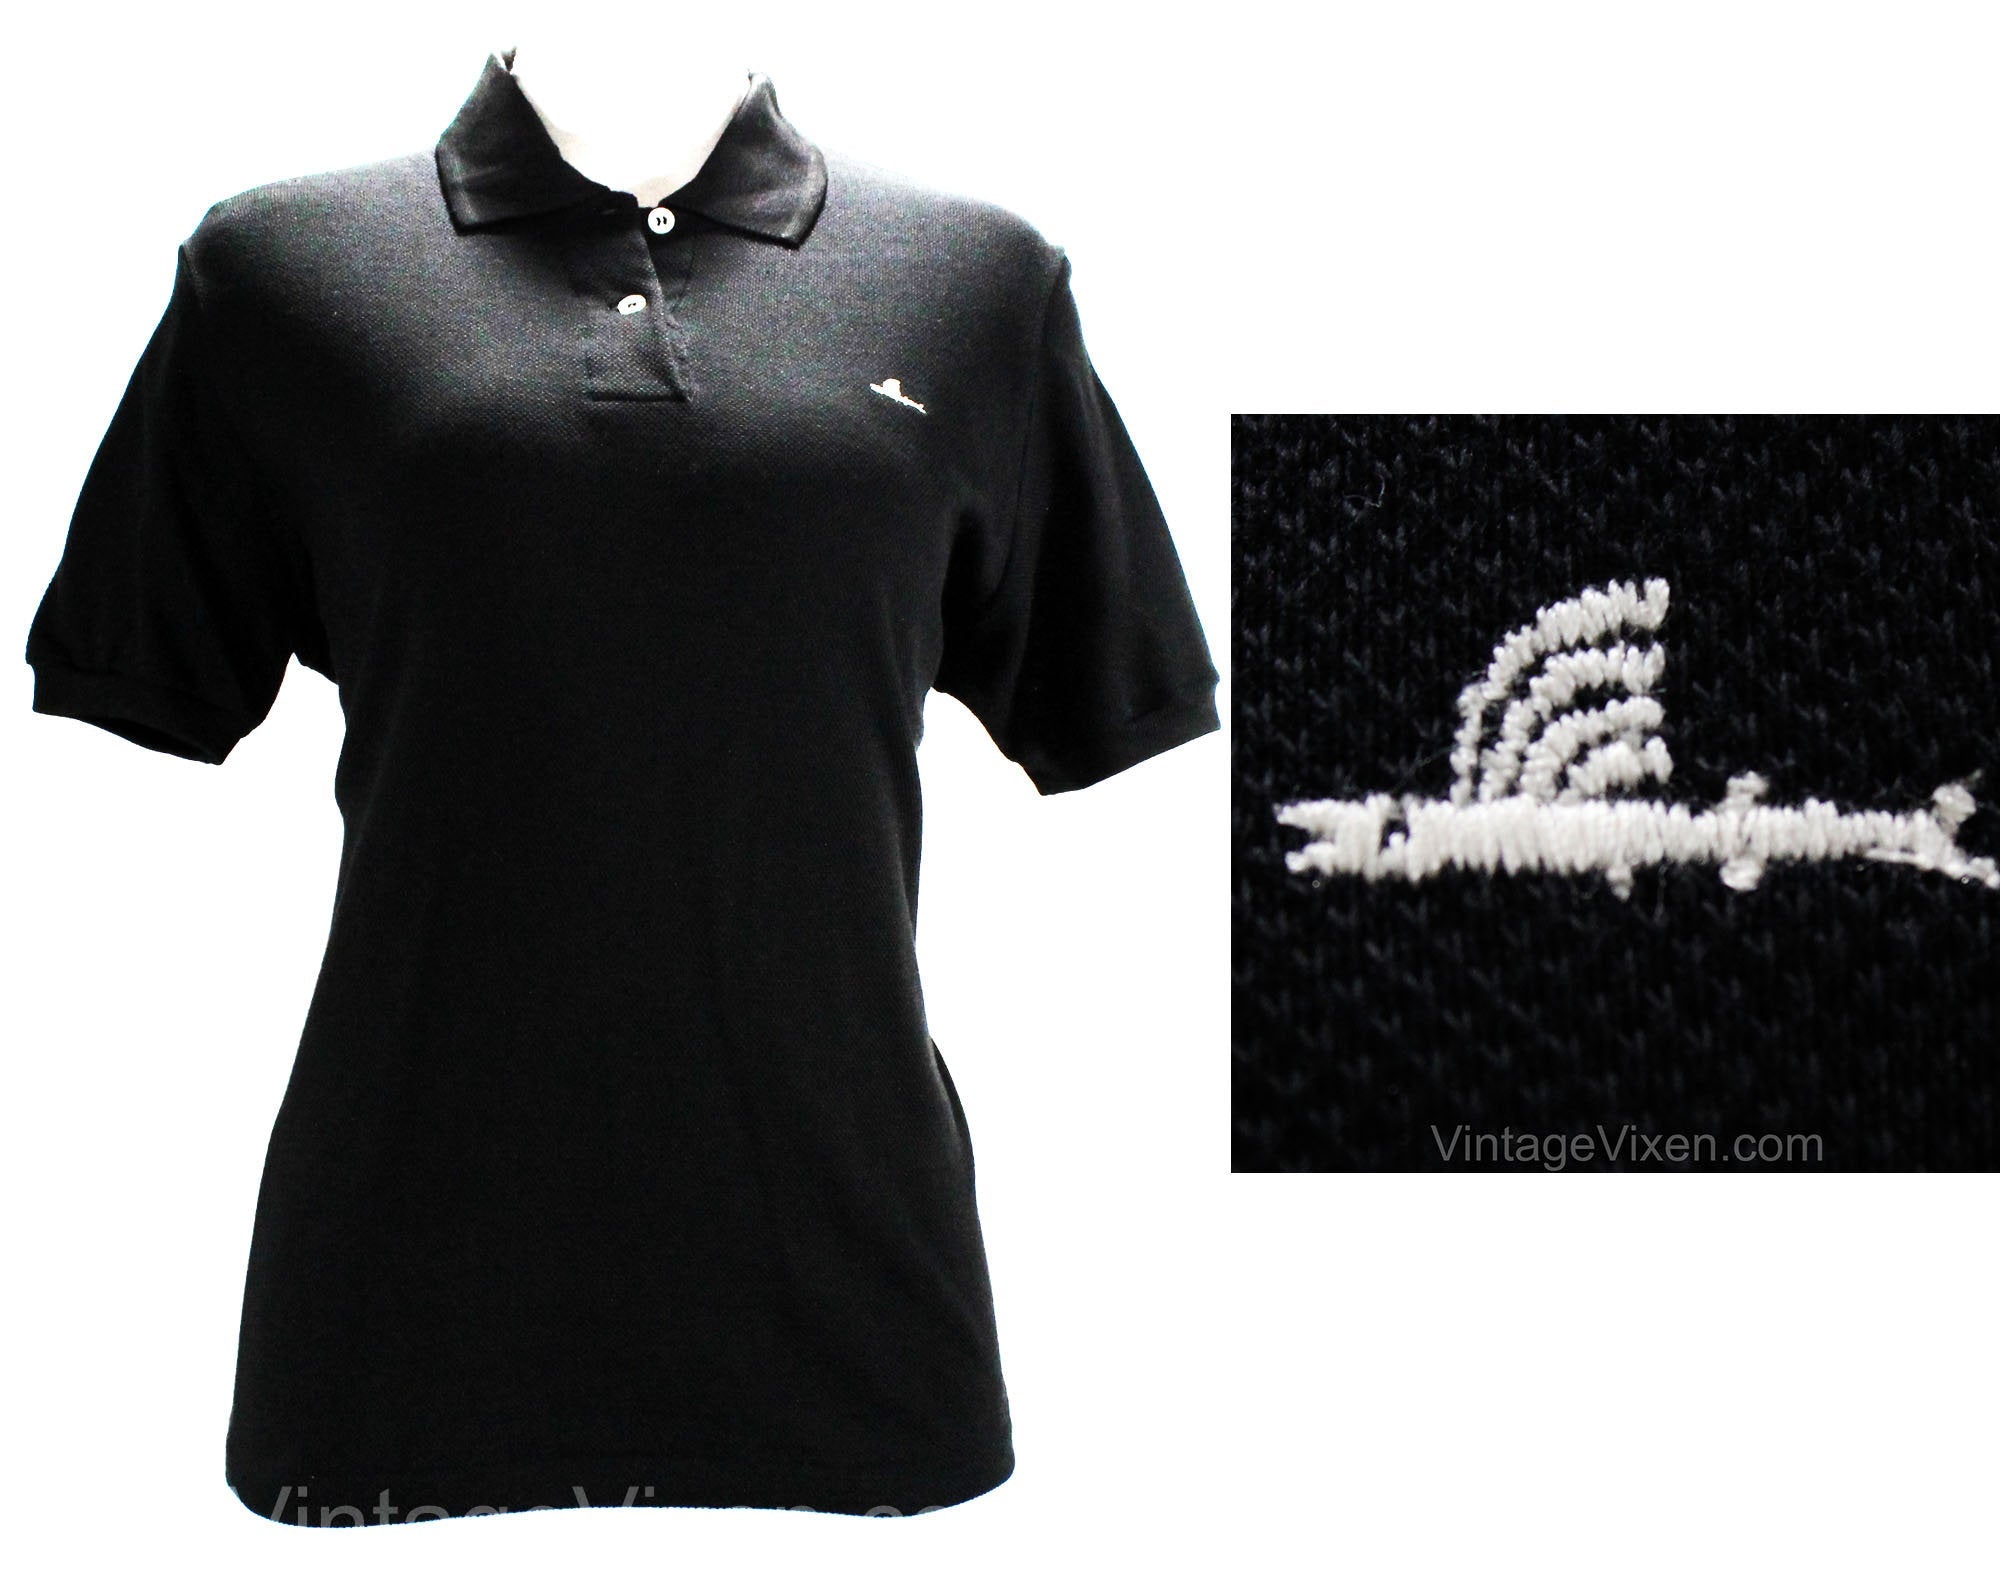 Small Black Polo Shirt by Catalina - 1950s Cotton Pique Knit